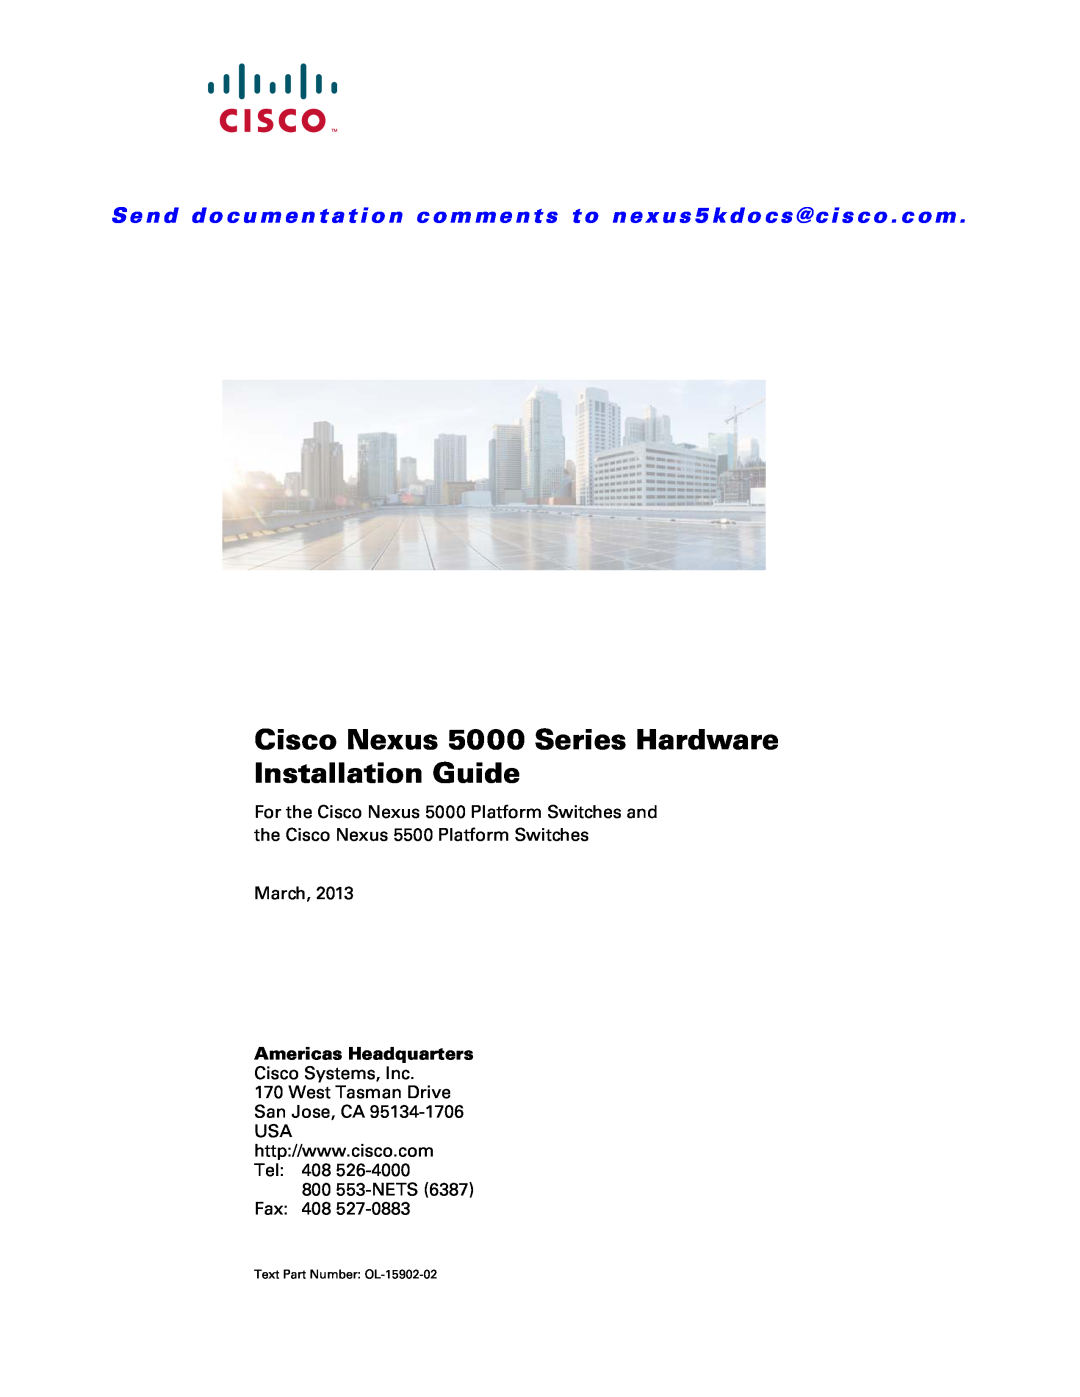 Cisco Systems manual Cisco Nexus 5000 Series Hardware Installation Guide, March, 800 553-NETS Fax 408 